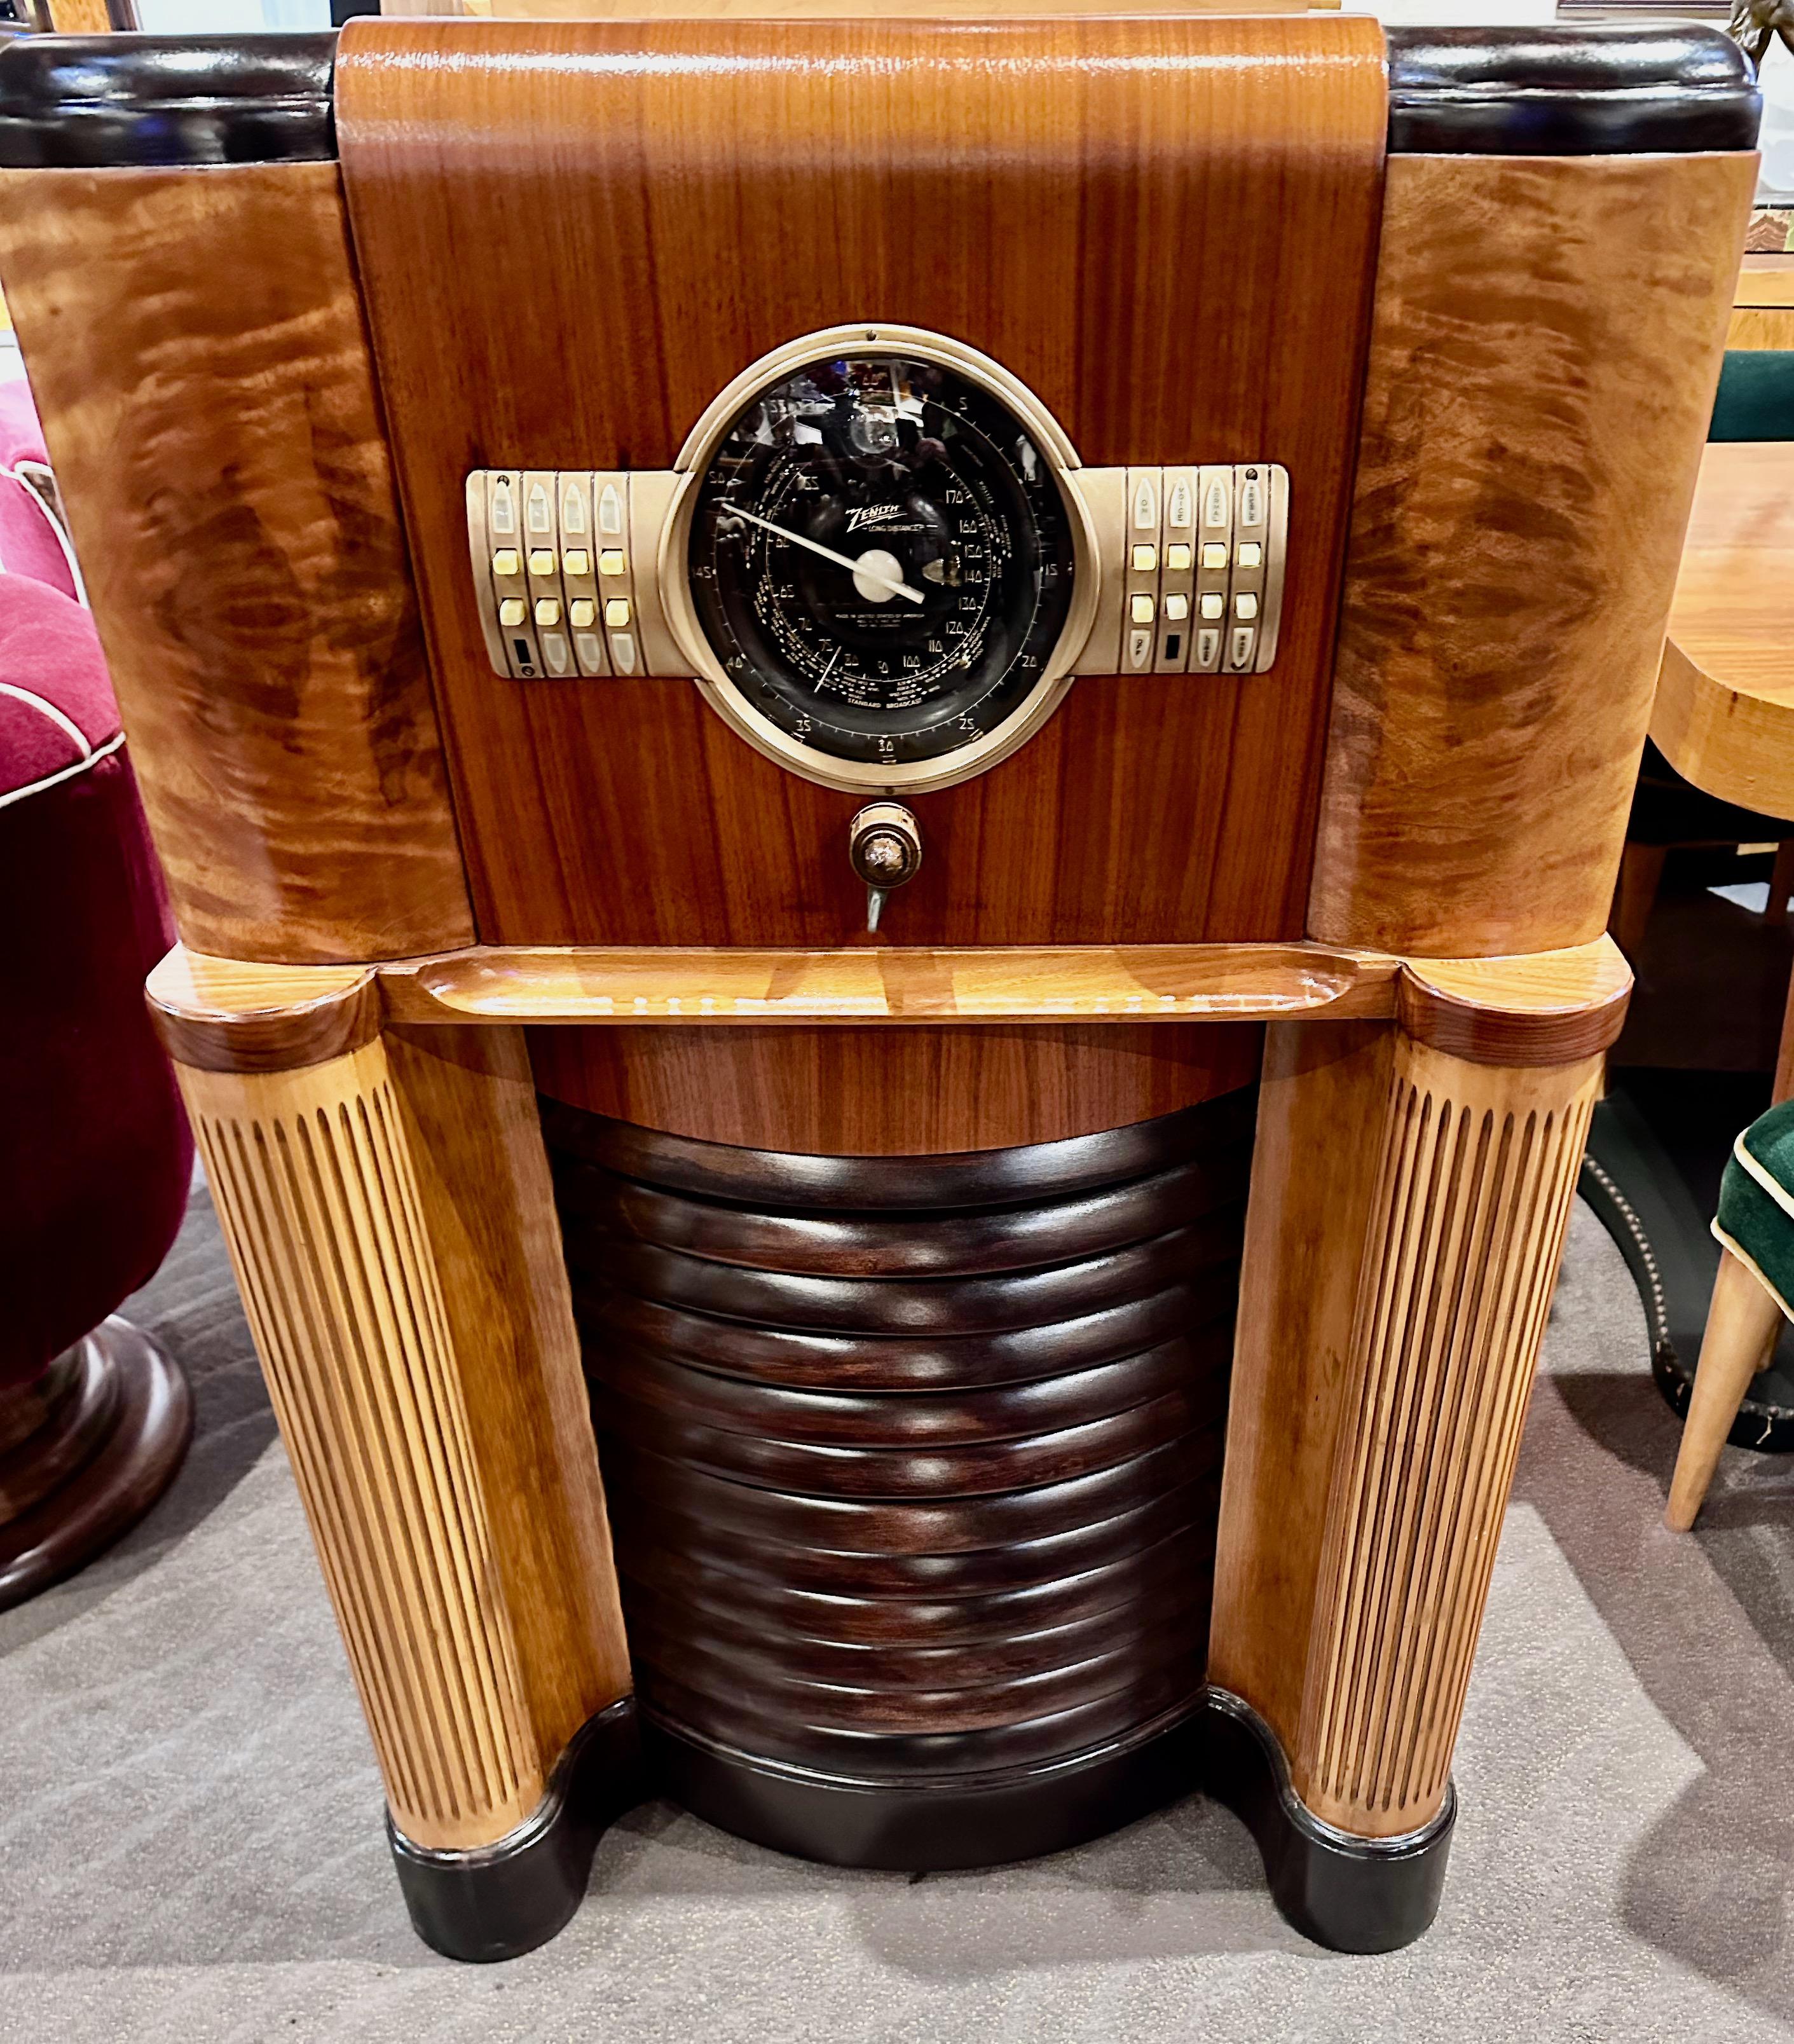 This is a 1939 Zenith 12 tube model 12S370, commonly called by collectors “Big Bertha,” one of Zenith’s most famous and collectible years. It is sporting the fabulous “Robot Shutter Dial” and a green tuning eye tube. It is one of the largest radios